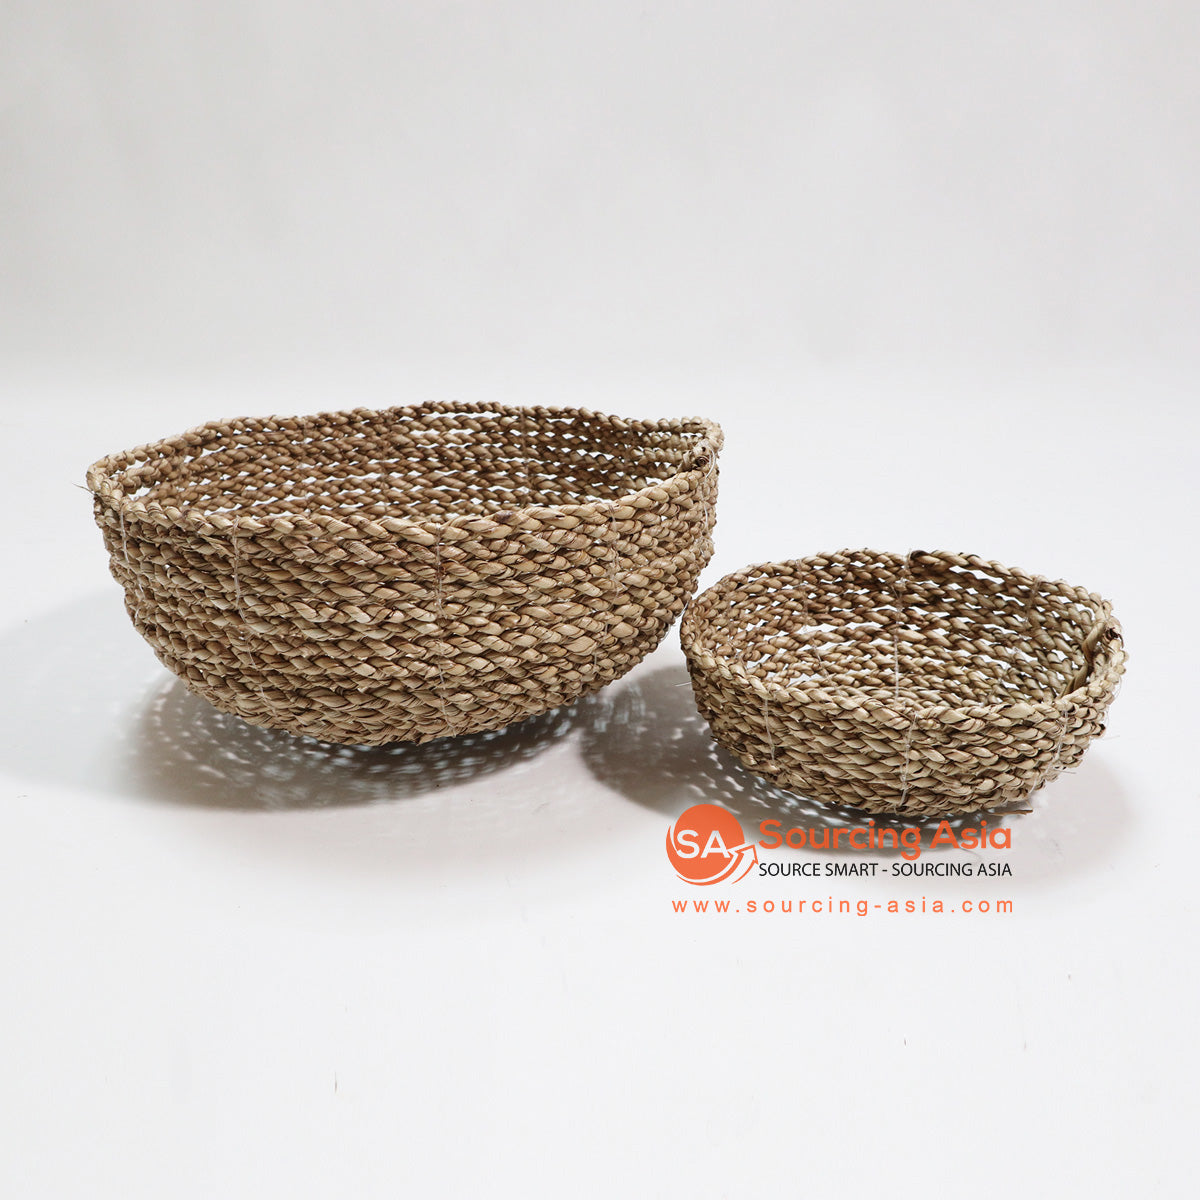 HBSC046 SET OF TWO NATURAL SEAGRASS TRINKET BOWLS